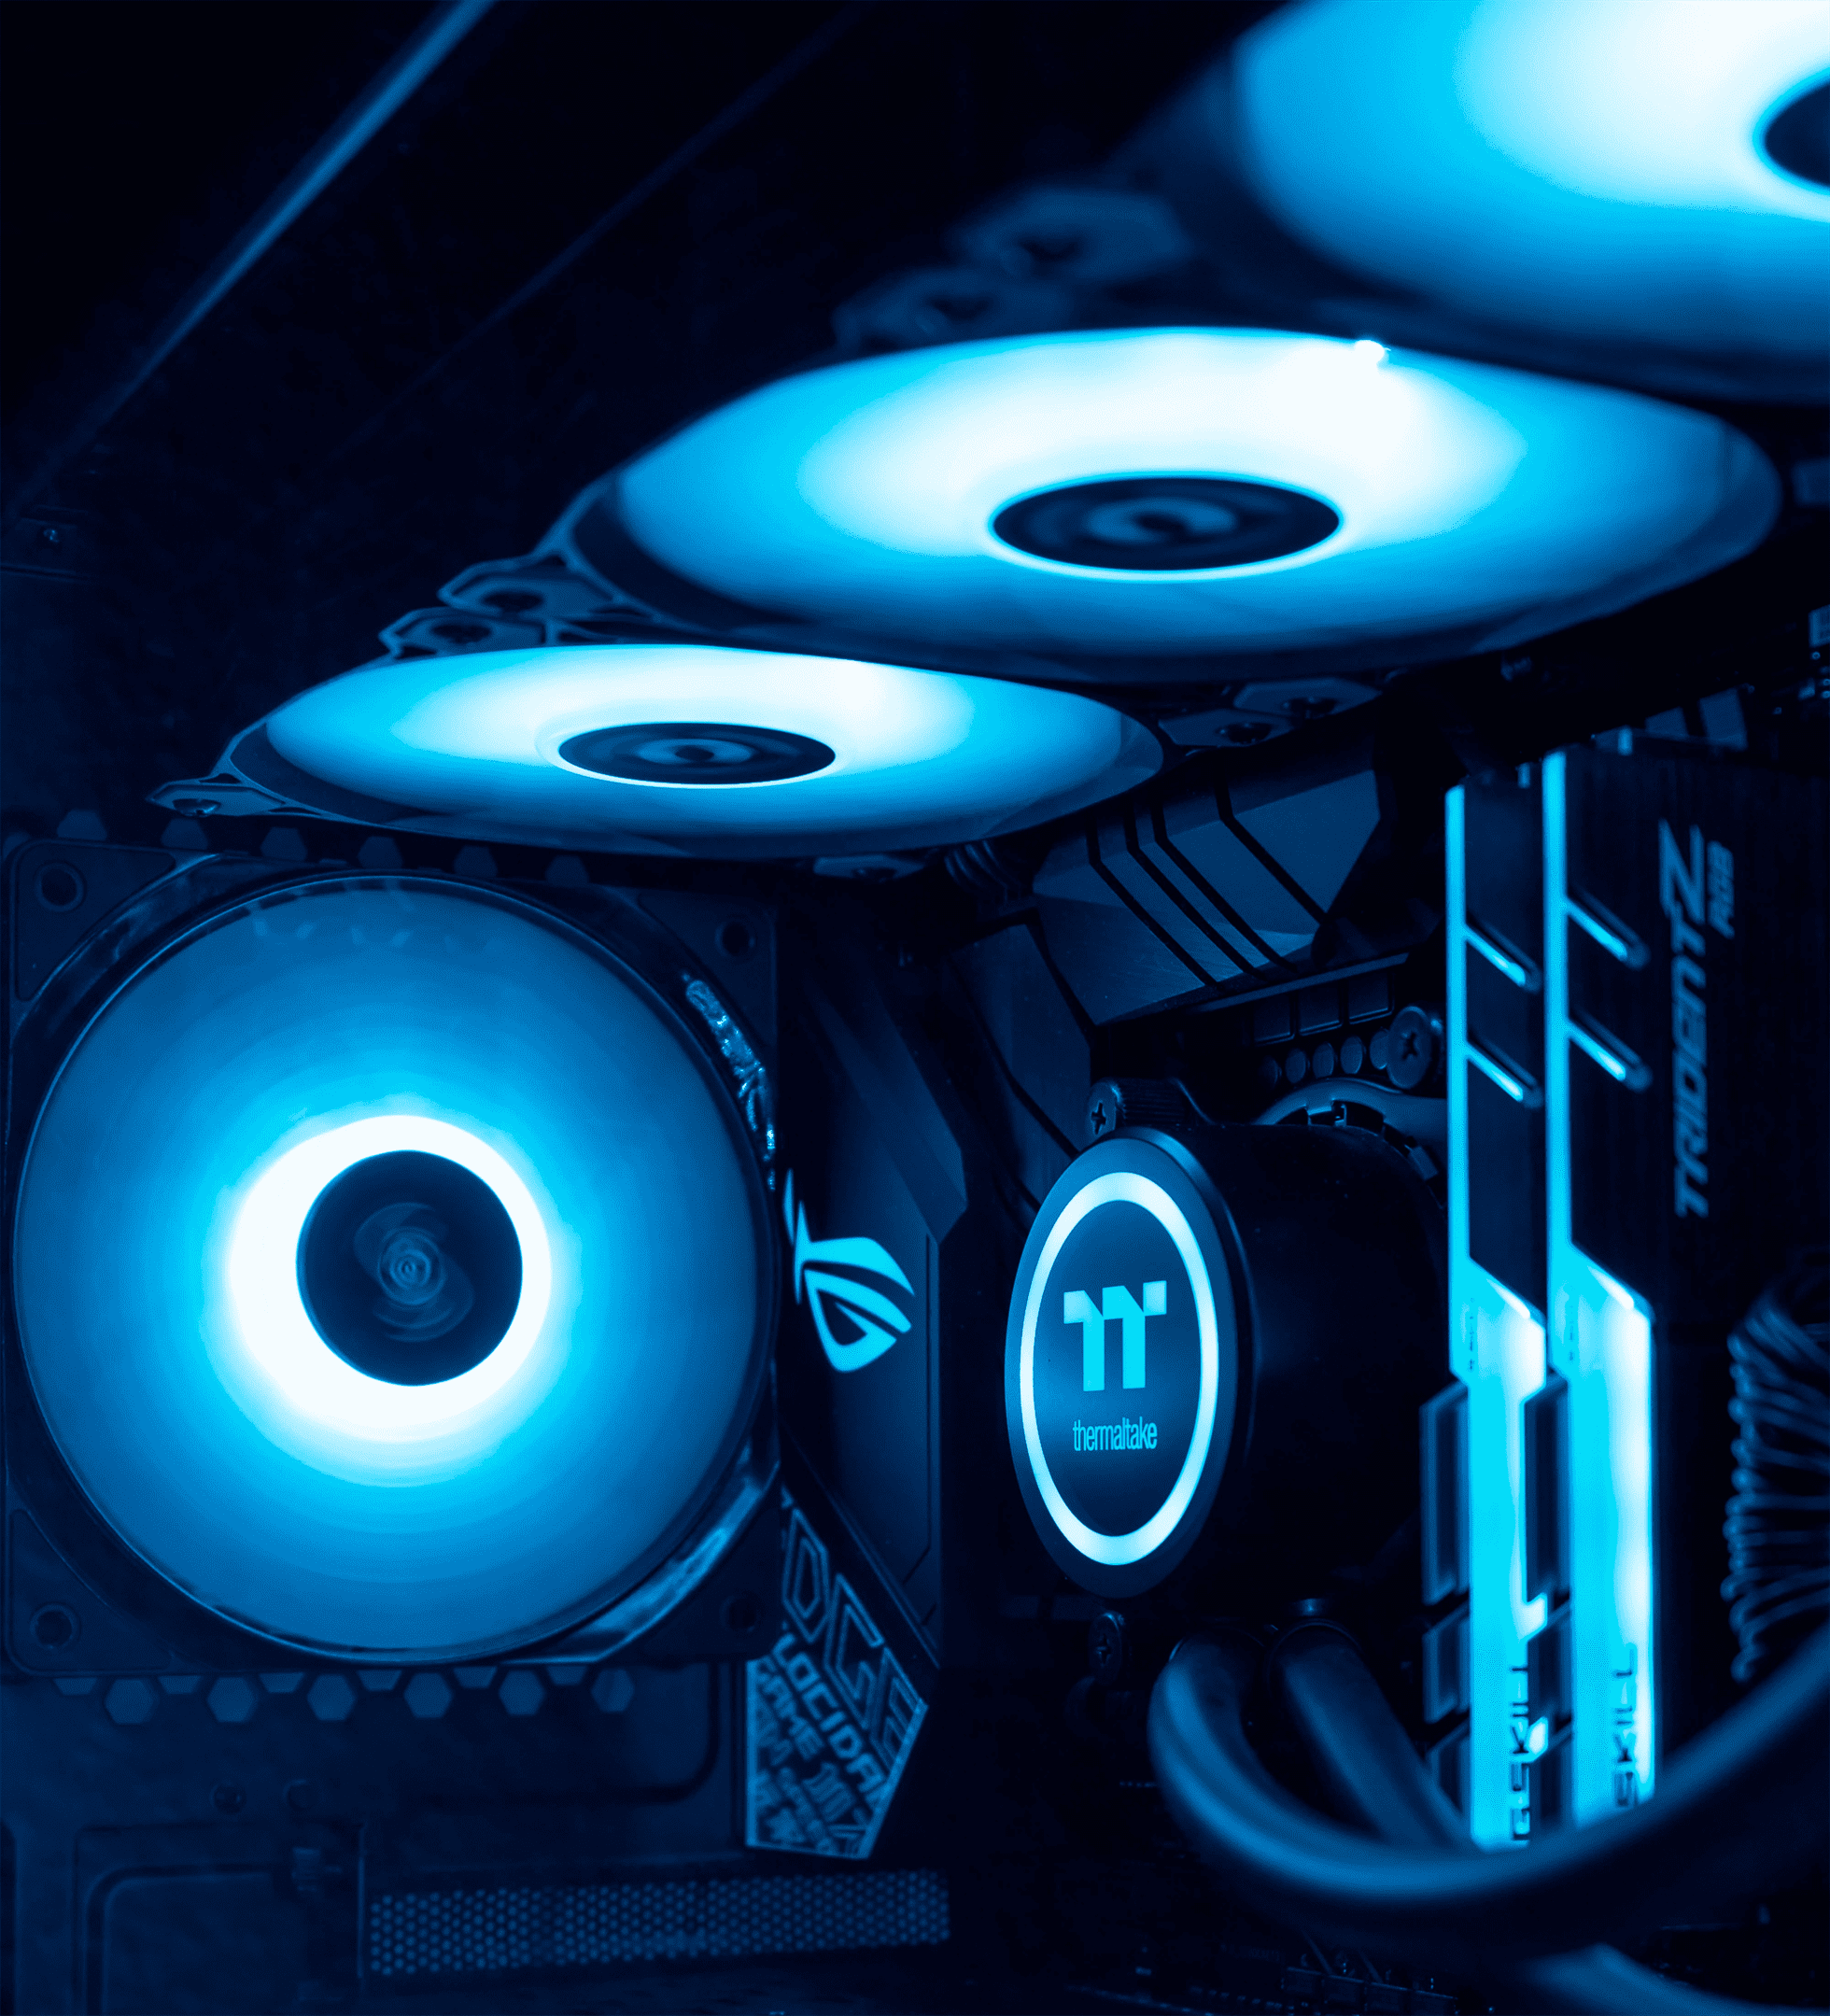 Liquid cooling and air cooling options for gaming PC builds